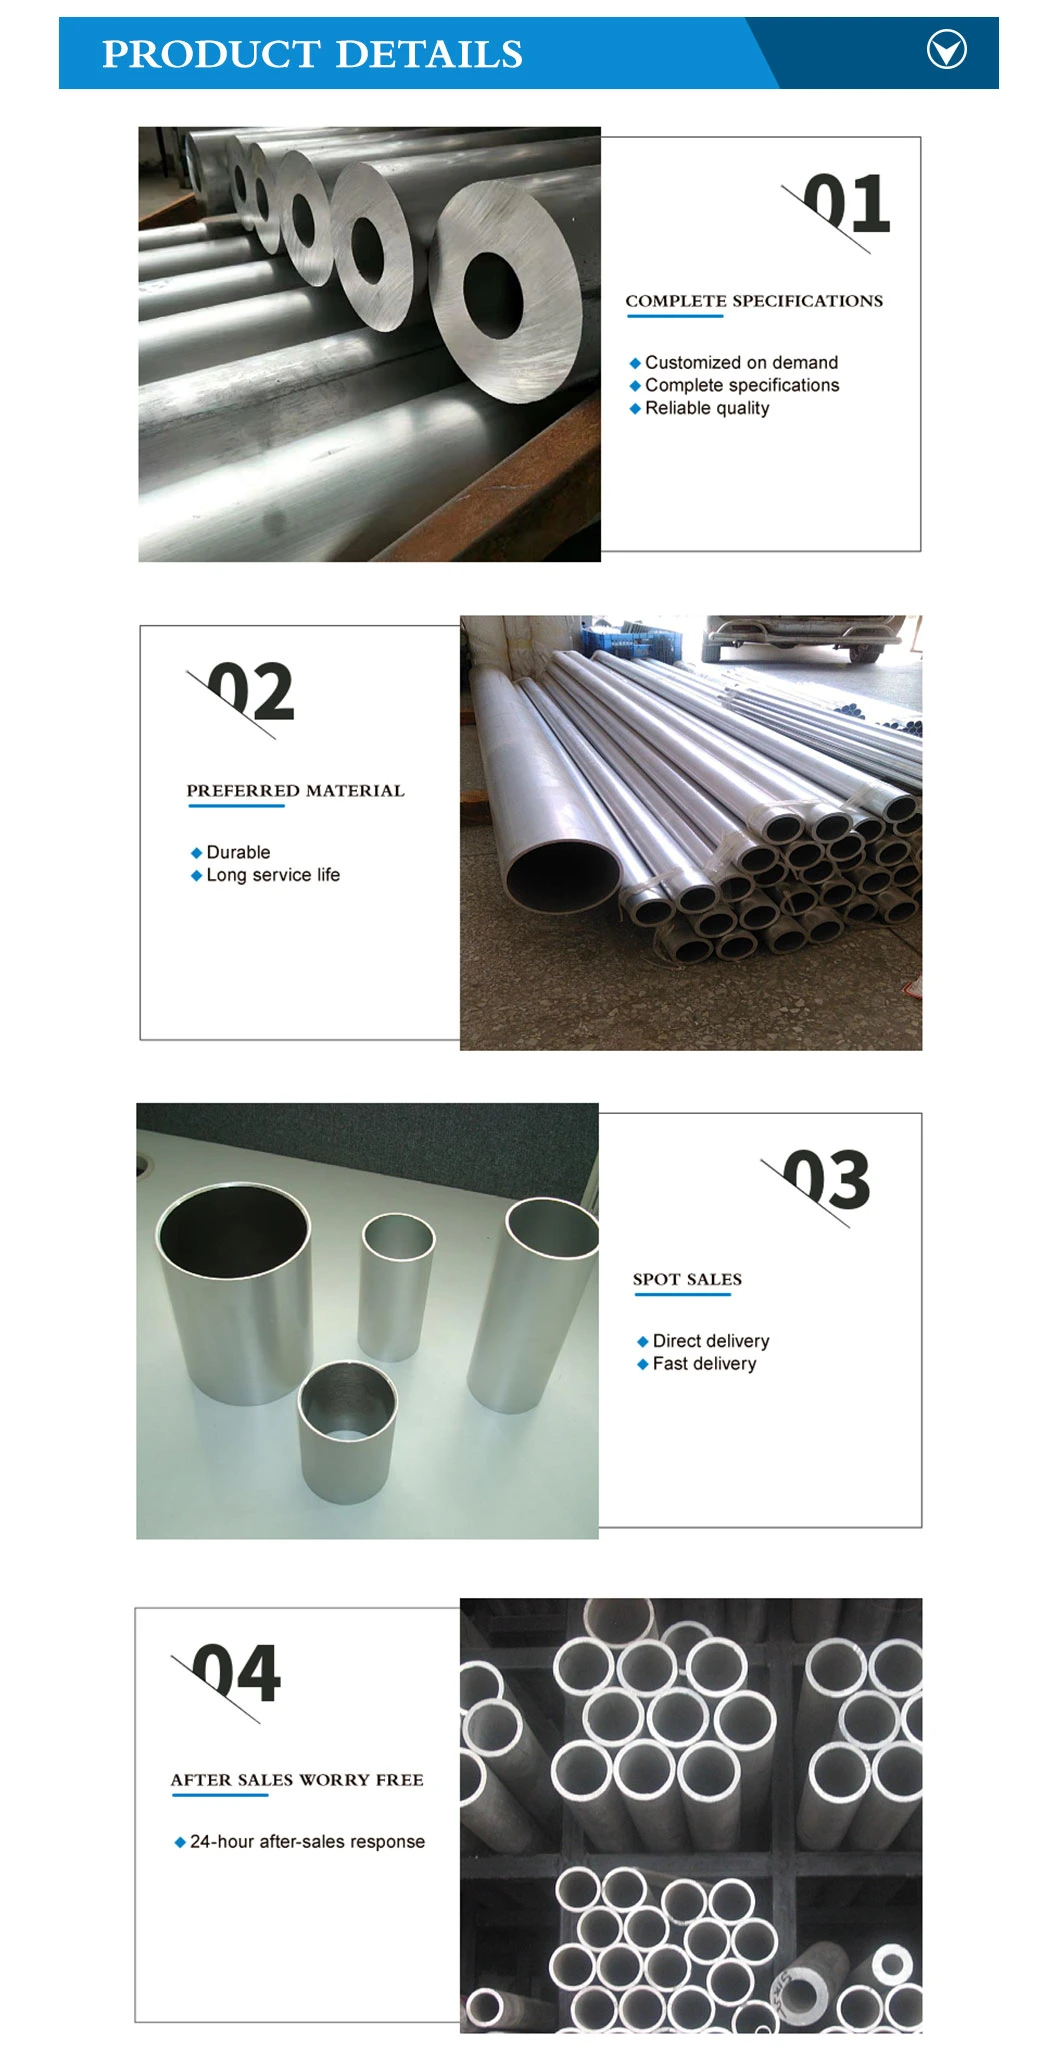 China Manufacture Nickel Alloy Steel Incoloy 800 Incoloy 800h Incoloy 800ht Seamless Tube / Pipe Price